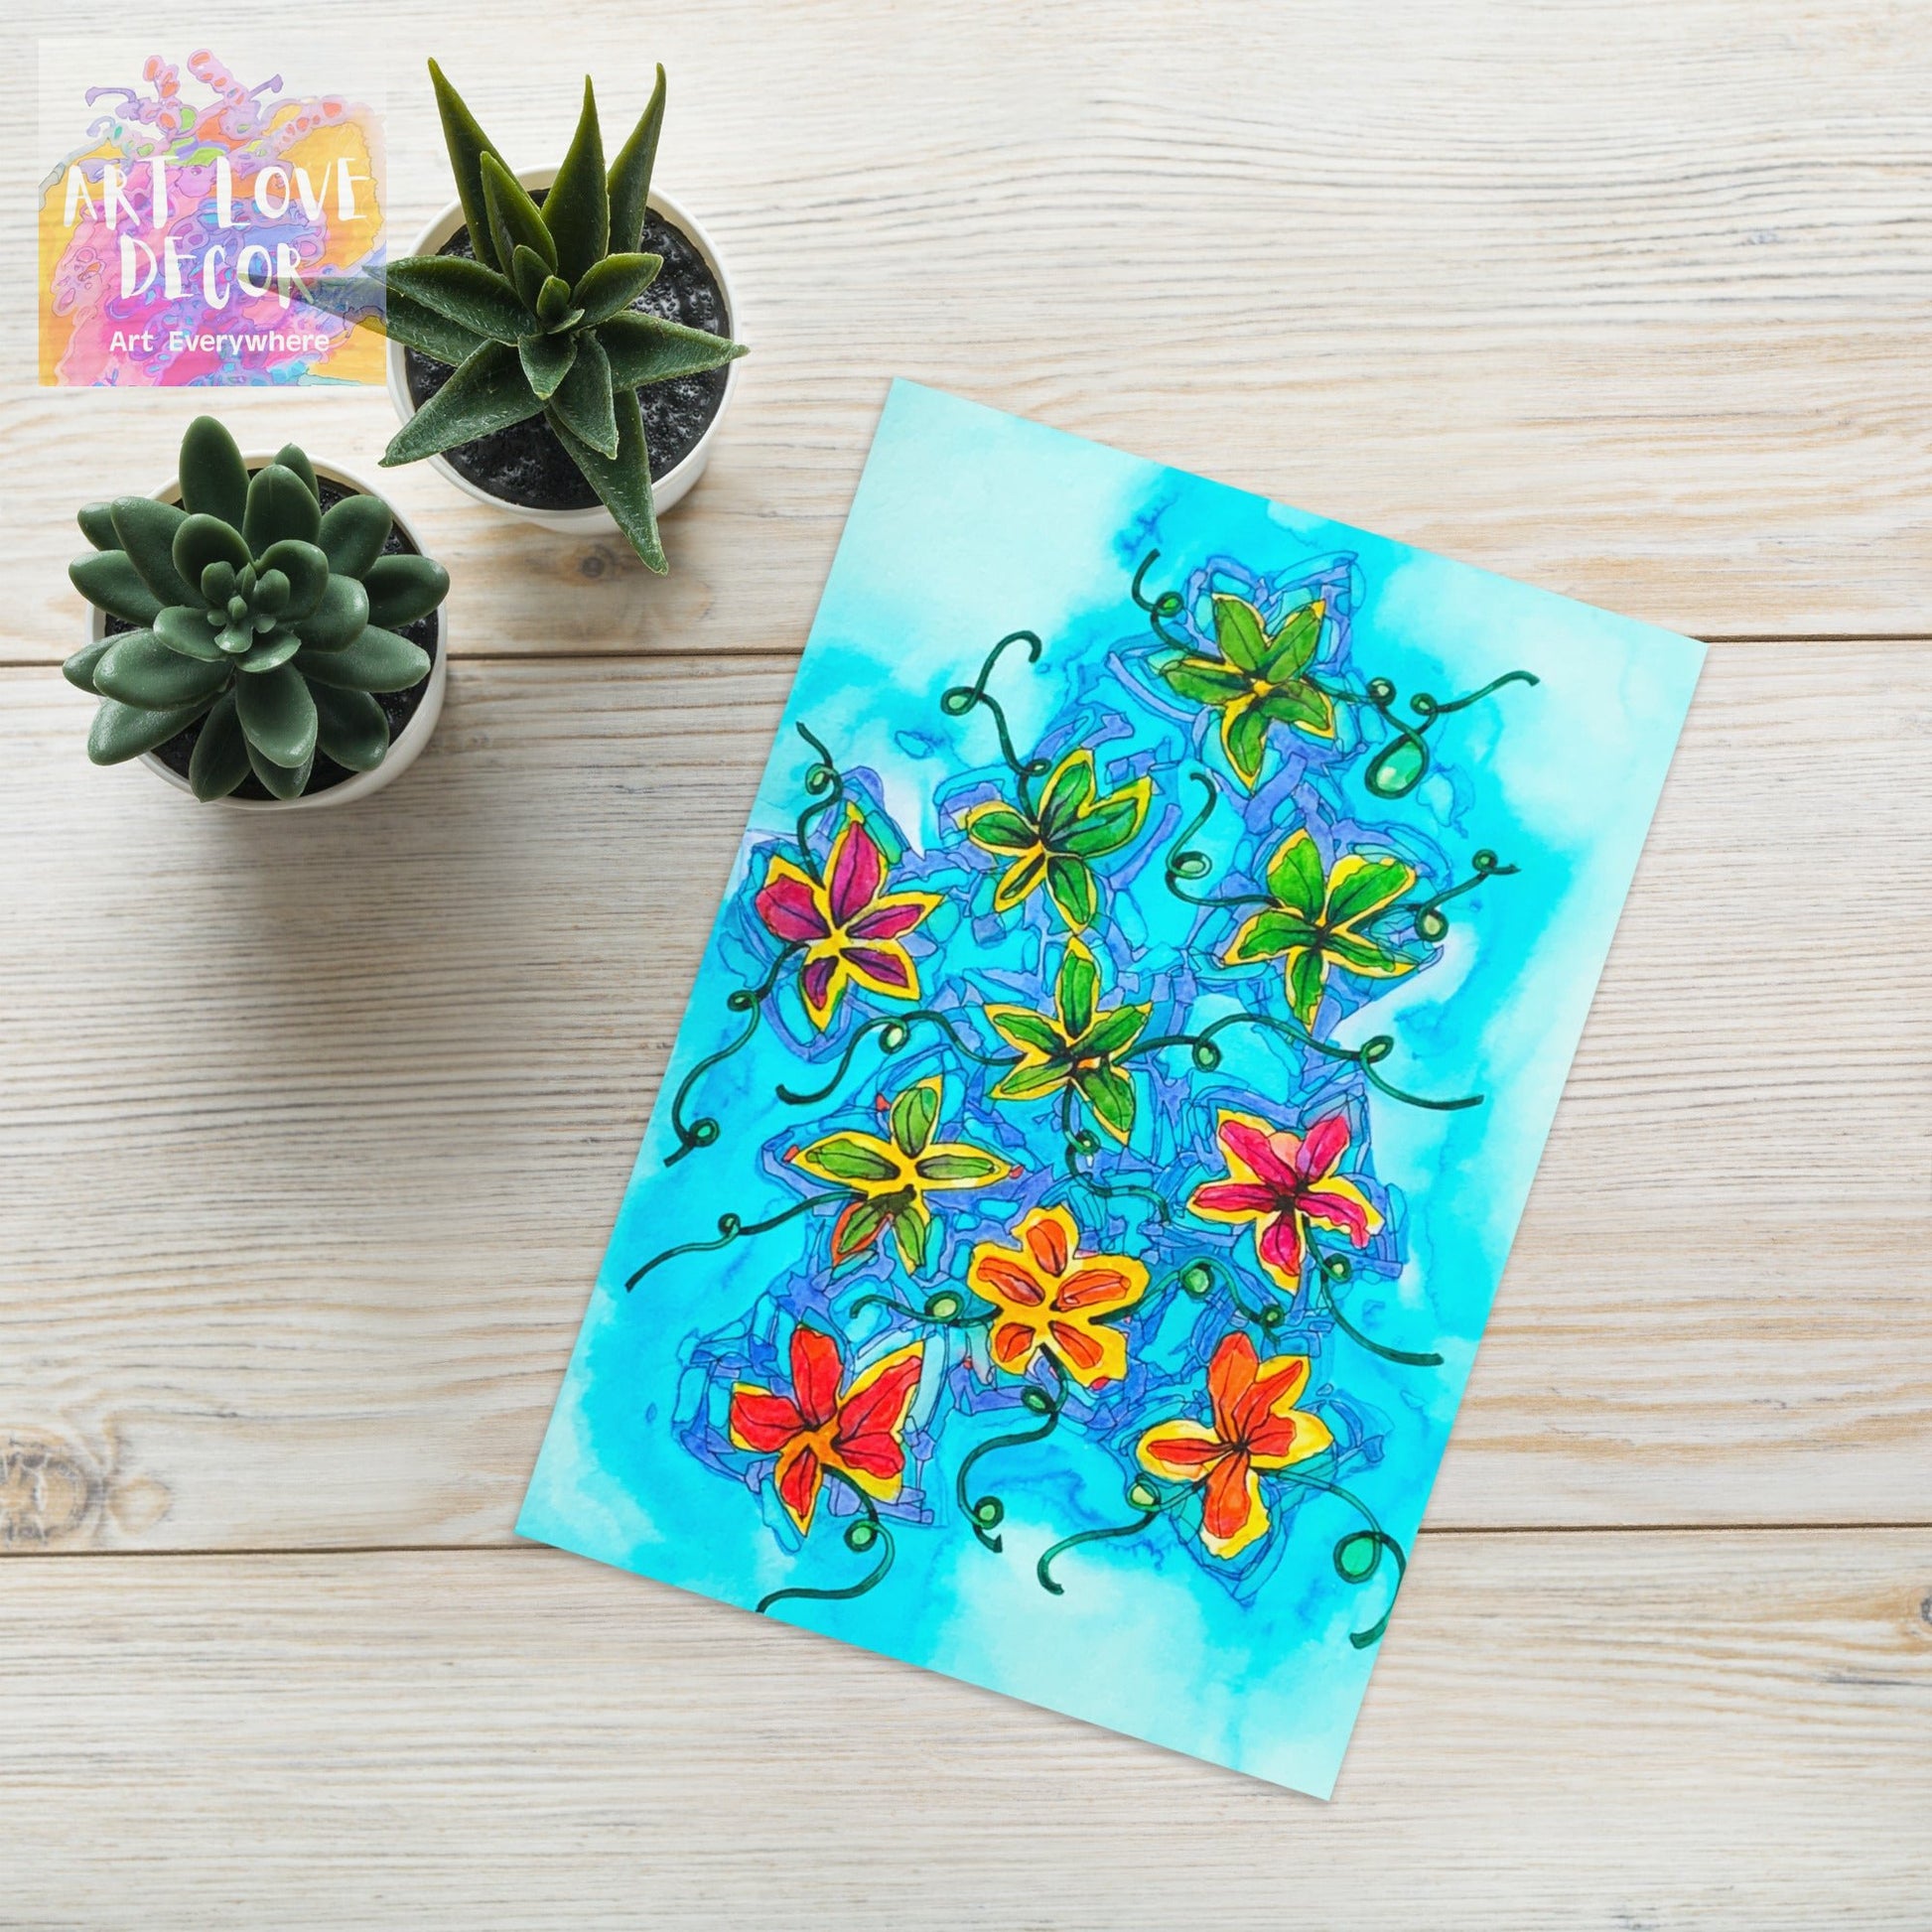 Flower Patch Abstract Greeting card - Art Love Decor